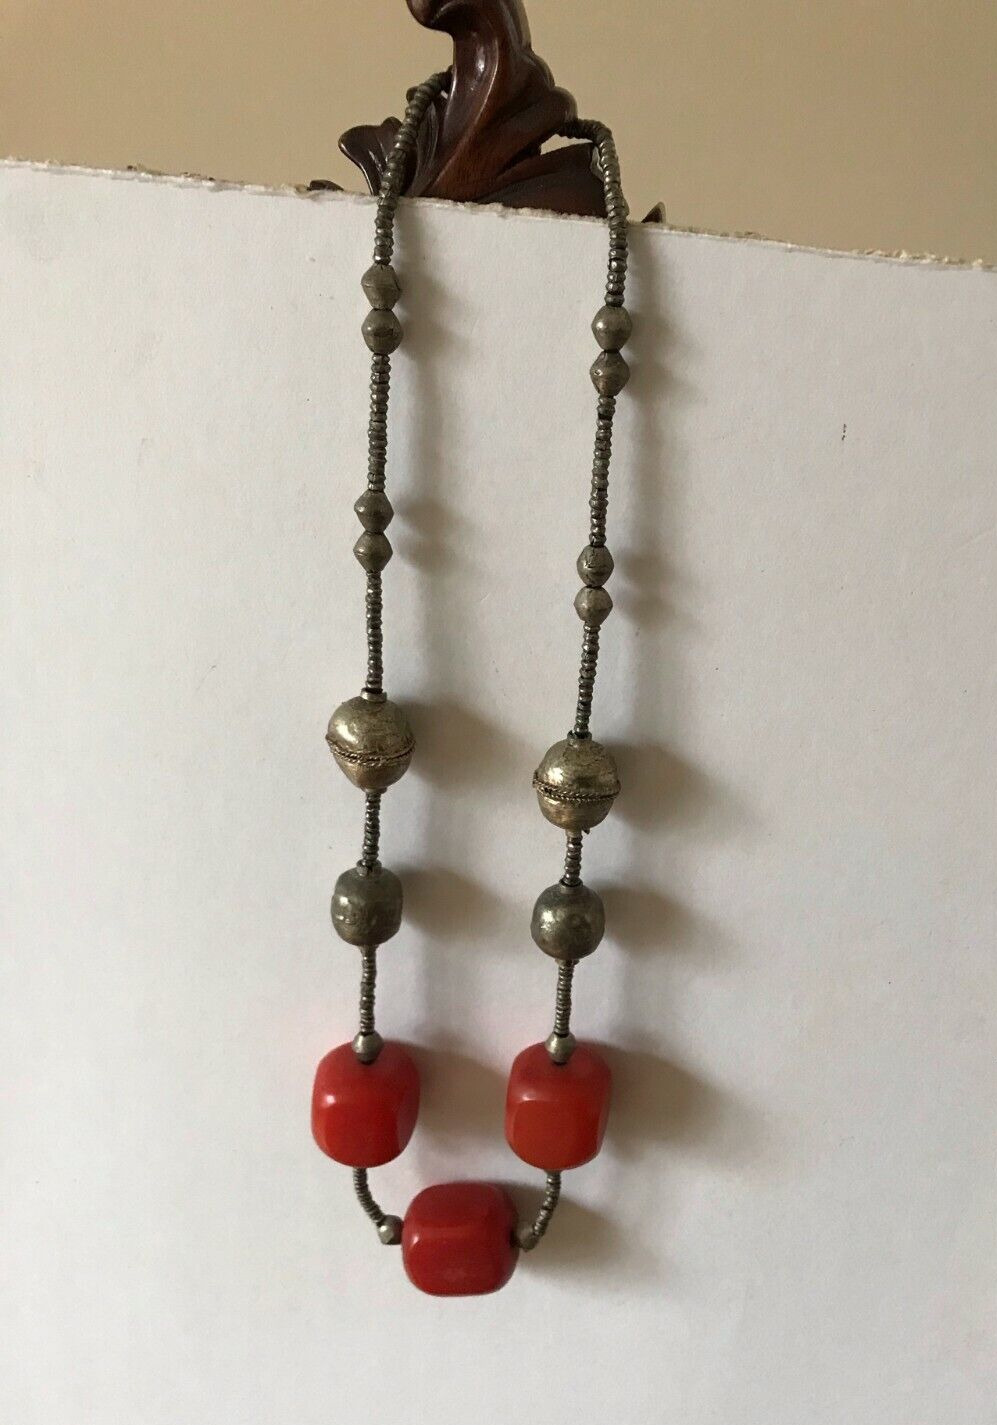 VTG / Antique Tibetan / Chinese Silver and Red Amber Beads Necklace